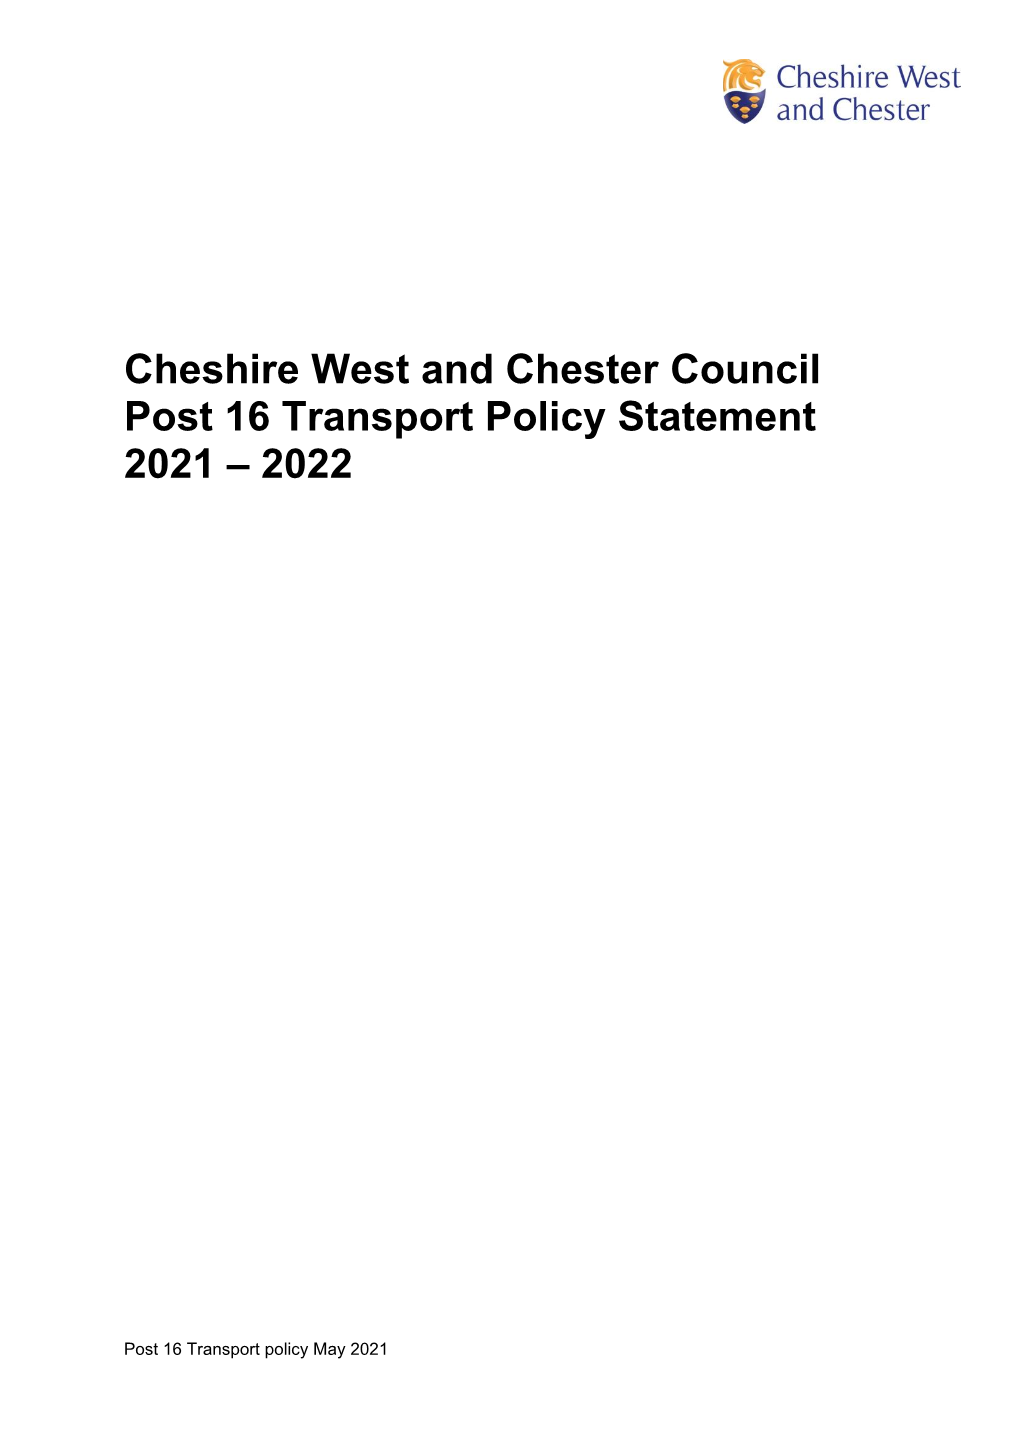 Post 16 Transport Policy Statement, May 2021